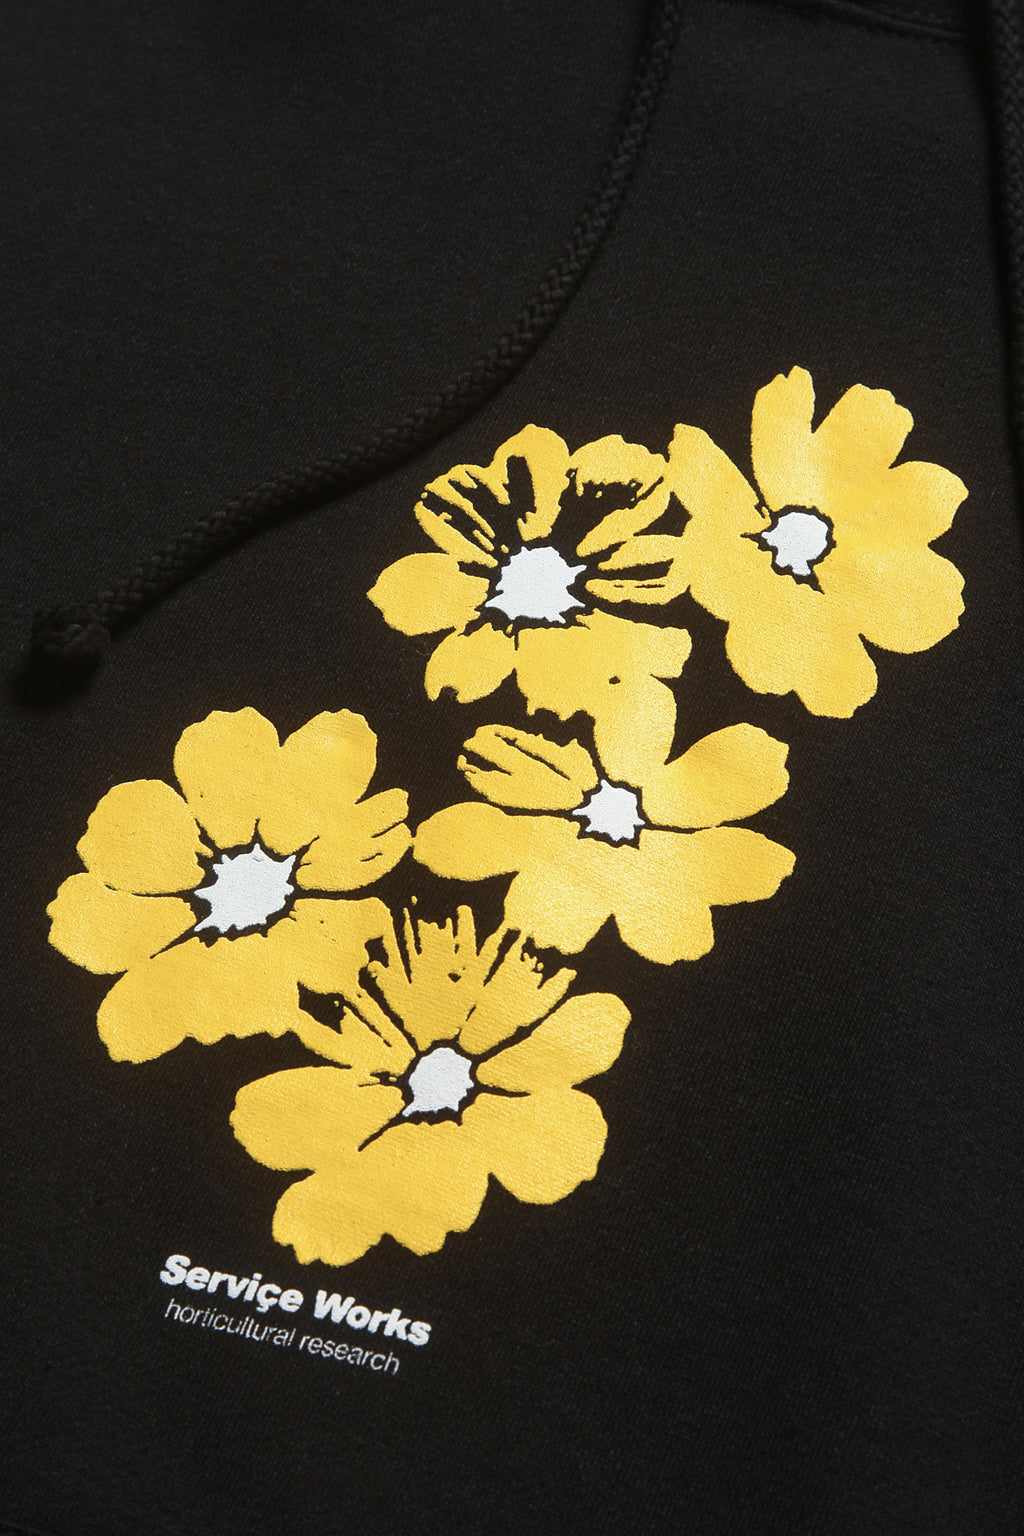 Service Works - Horticultural Research Hoodie - Black